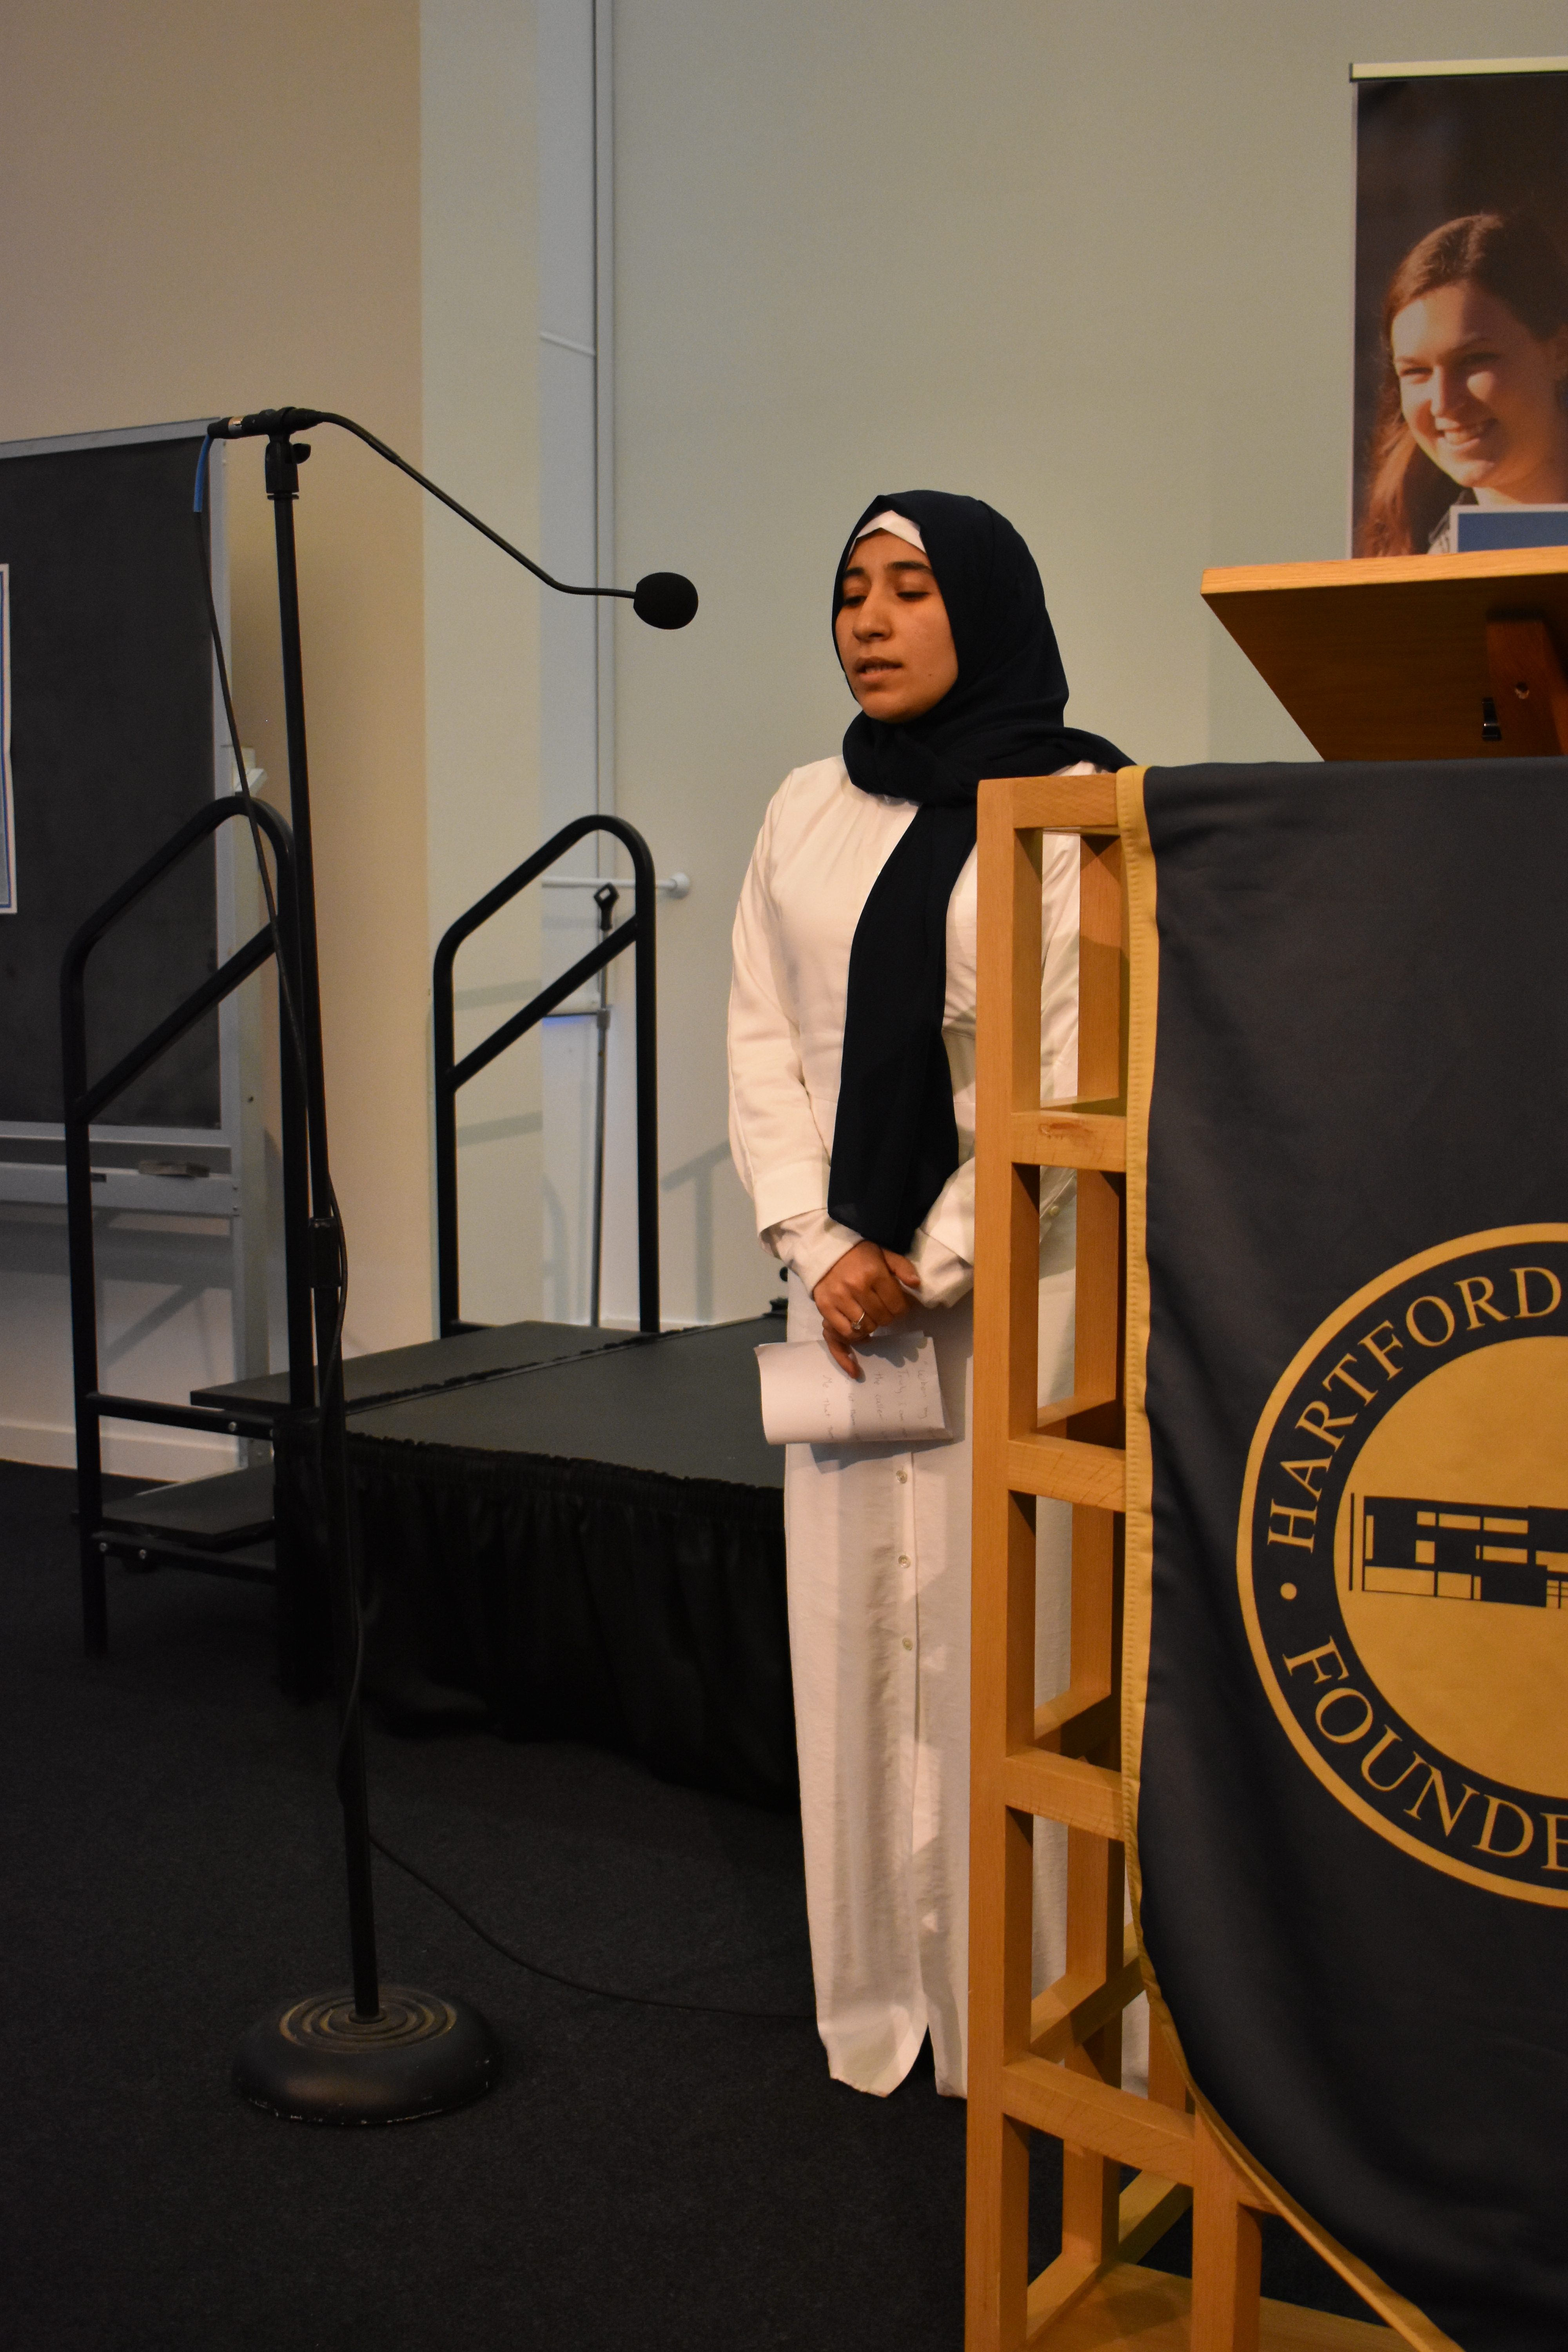 Convocation 2019 - Enas Ghassal recites from the Qur’an